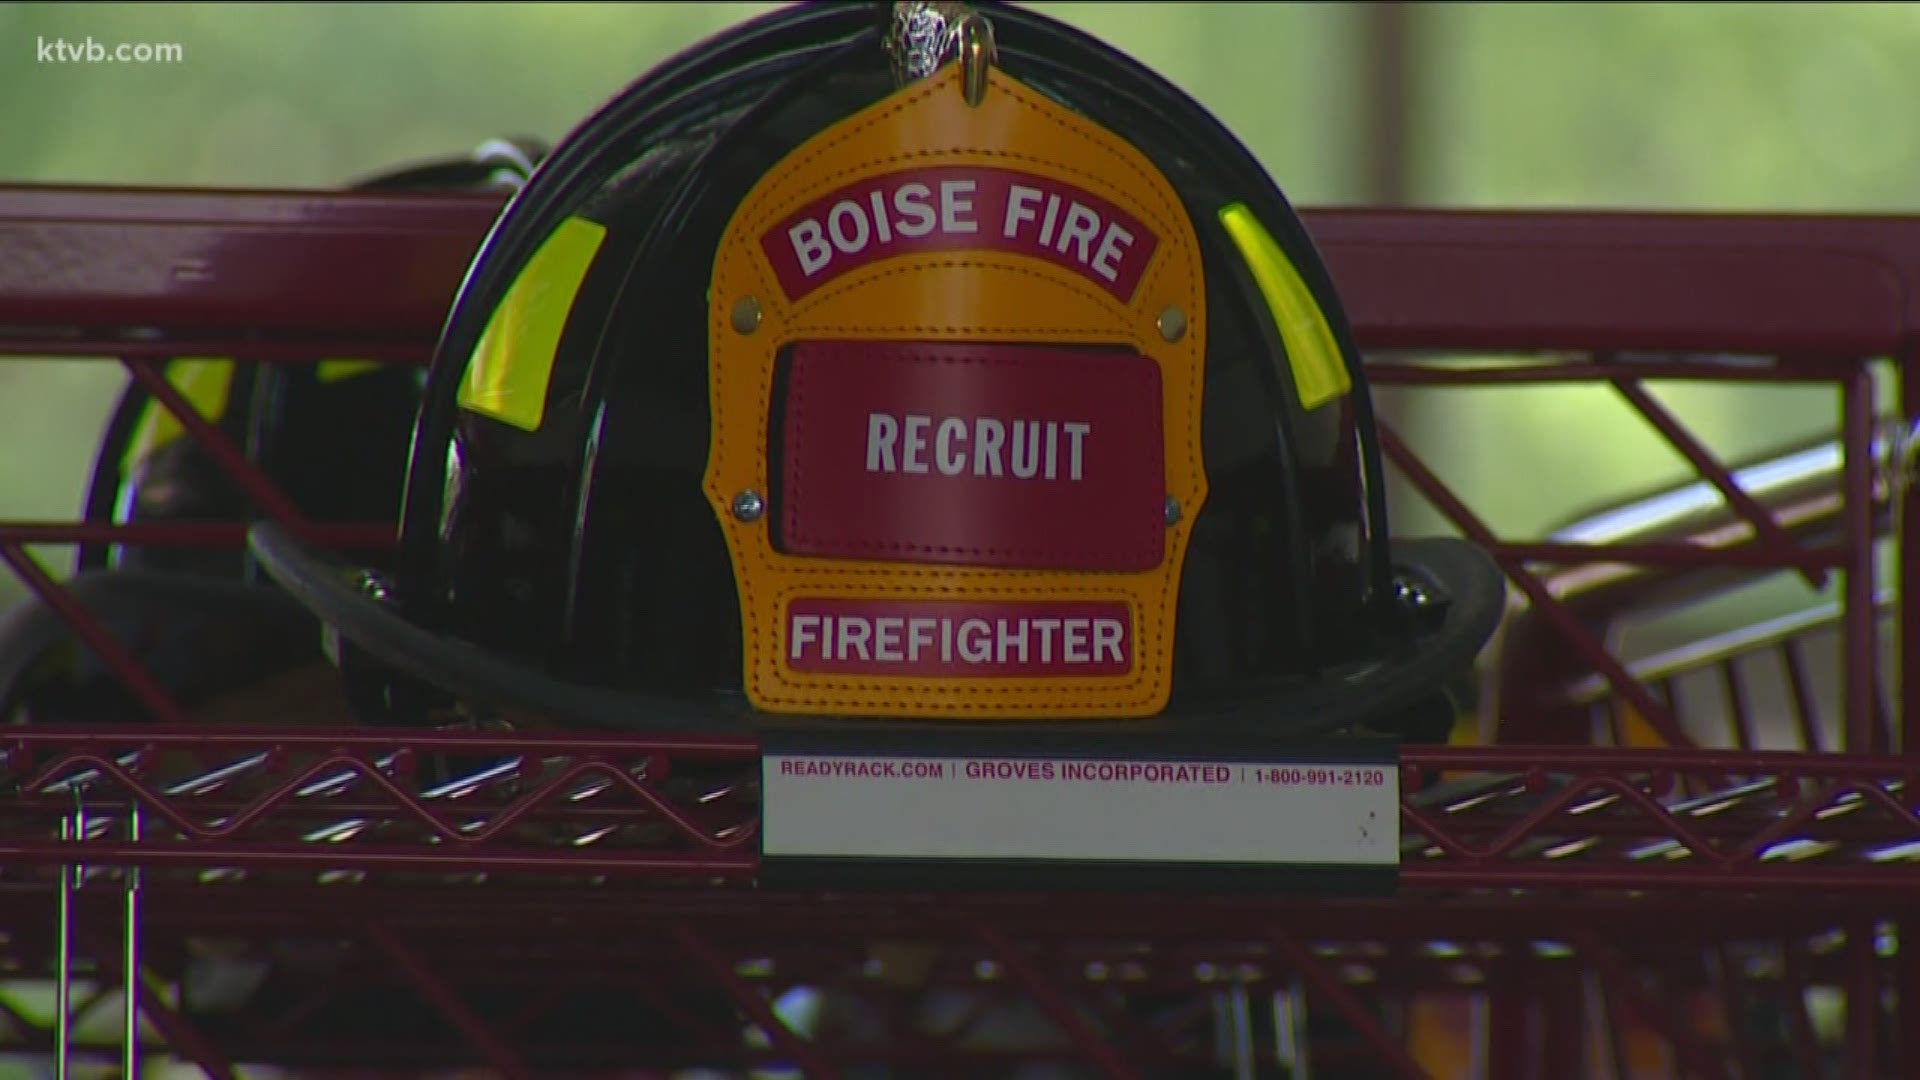 On Monday, the Boise Fire Department welcomed 33rd recruit academy, the largest fire academy in the department's recent history. "It's a good group of dudes," said Cory Brady, a fire recruit with academy "I can't wait to grind with them and work hard and try to represent the city as best we can."